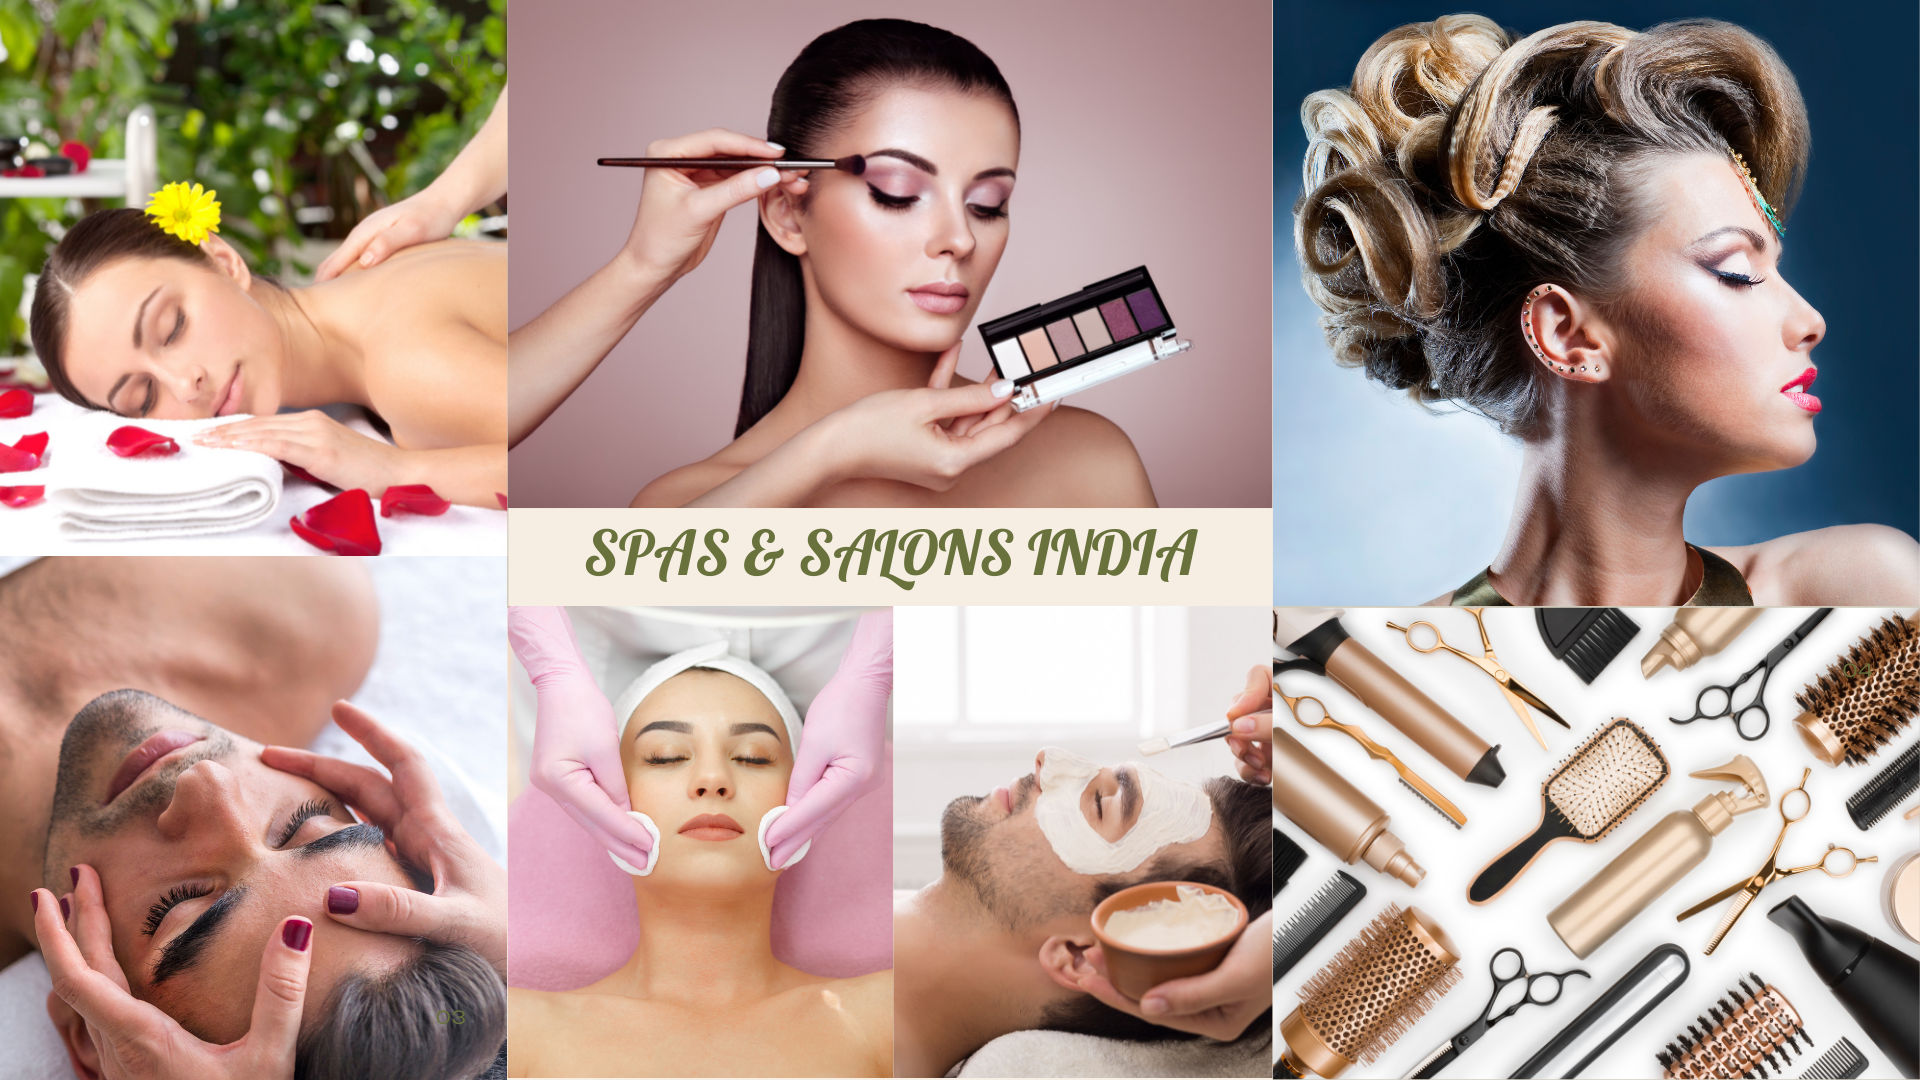 Join as Makeup Artist / Hairstylist / Therapist - Spas And Salons India